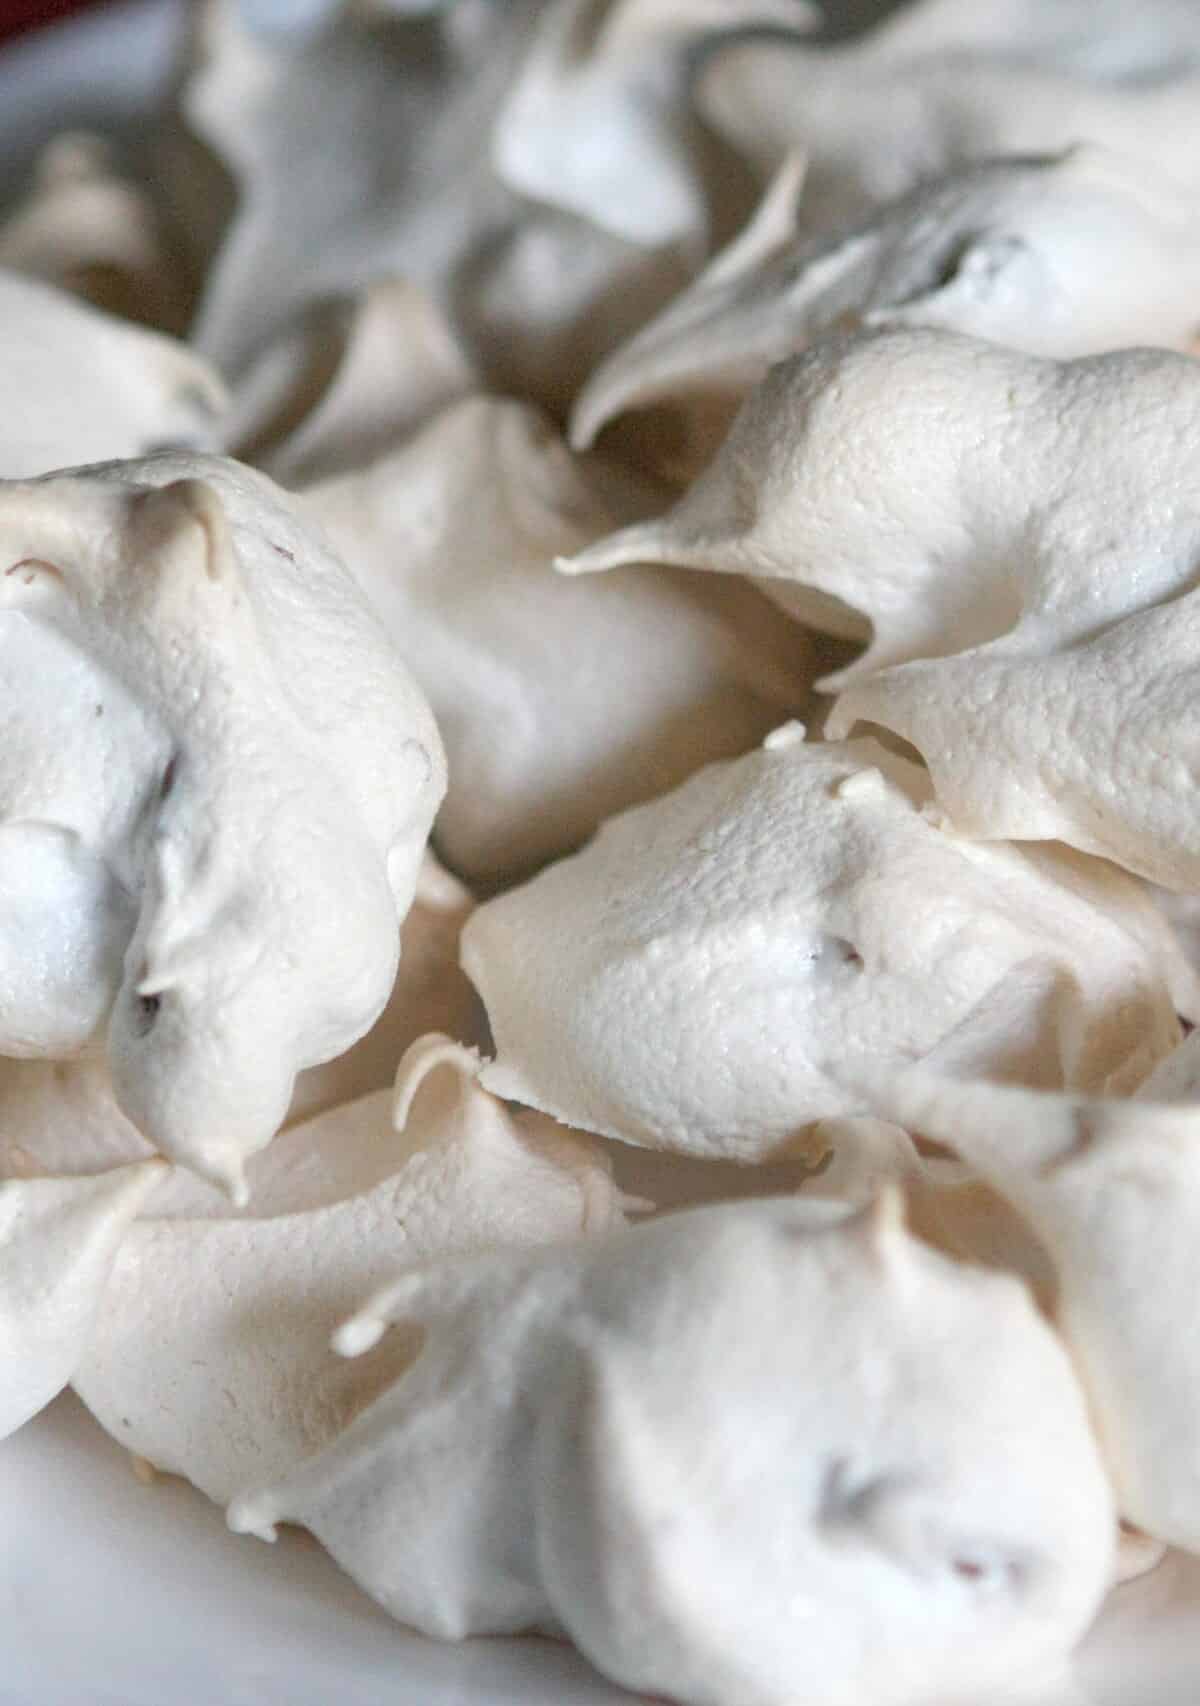  Take a bite and let these meringue cookies melt in your mouth